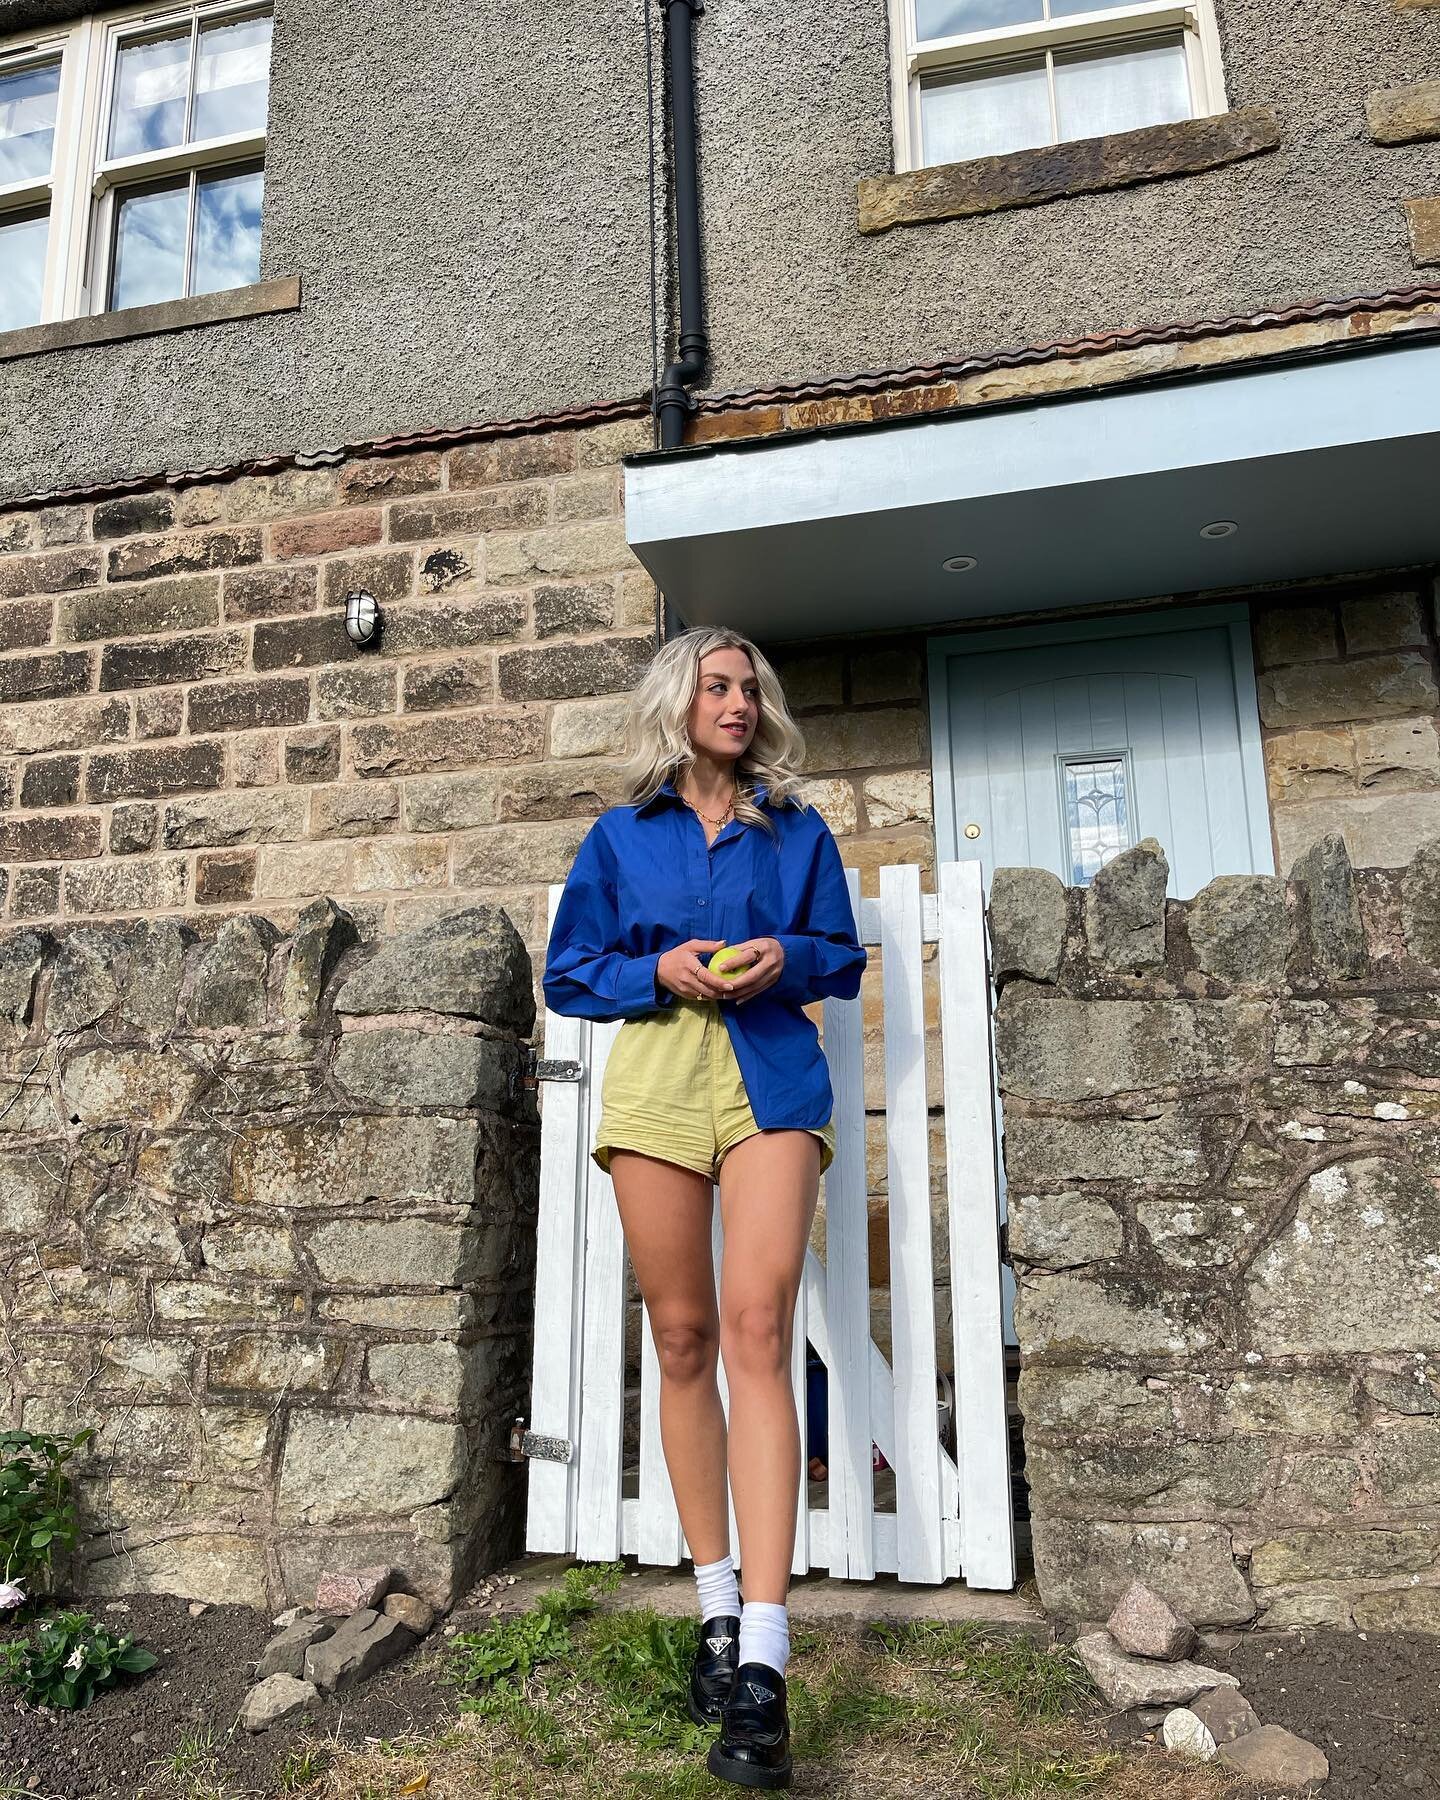 An apple a day and all that🍏
.
.
.
.
.
#pradaloafers #shortshorts #loafers #buttonupshirt #buttonup #platinumblonde #loafershoes #pradashoes #ukcountryside #countrysidelife #derbyshiredales #derbyshire #colourblocking #summerootd #summeroutfits #sum